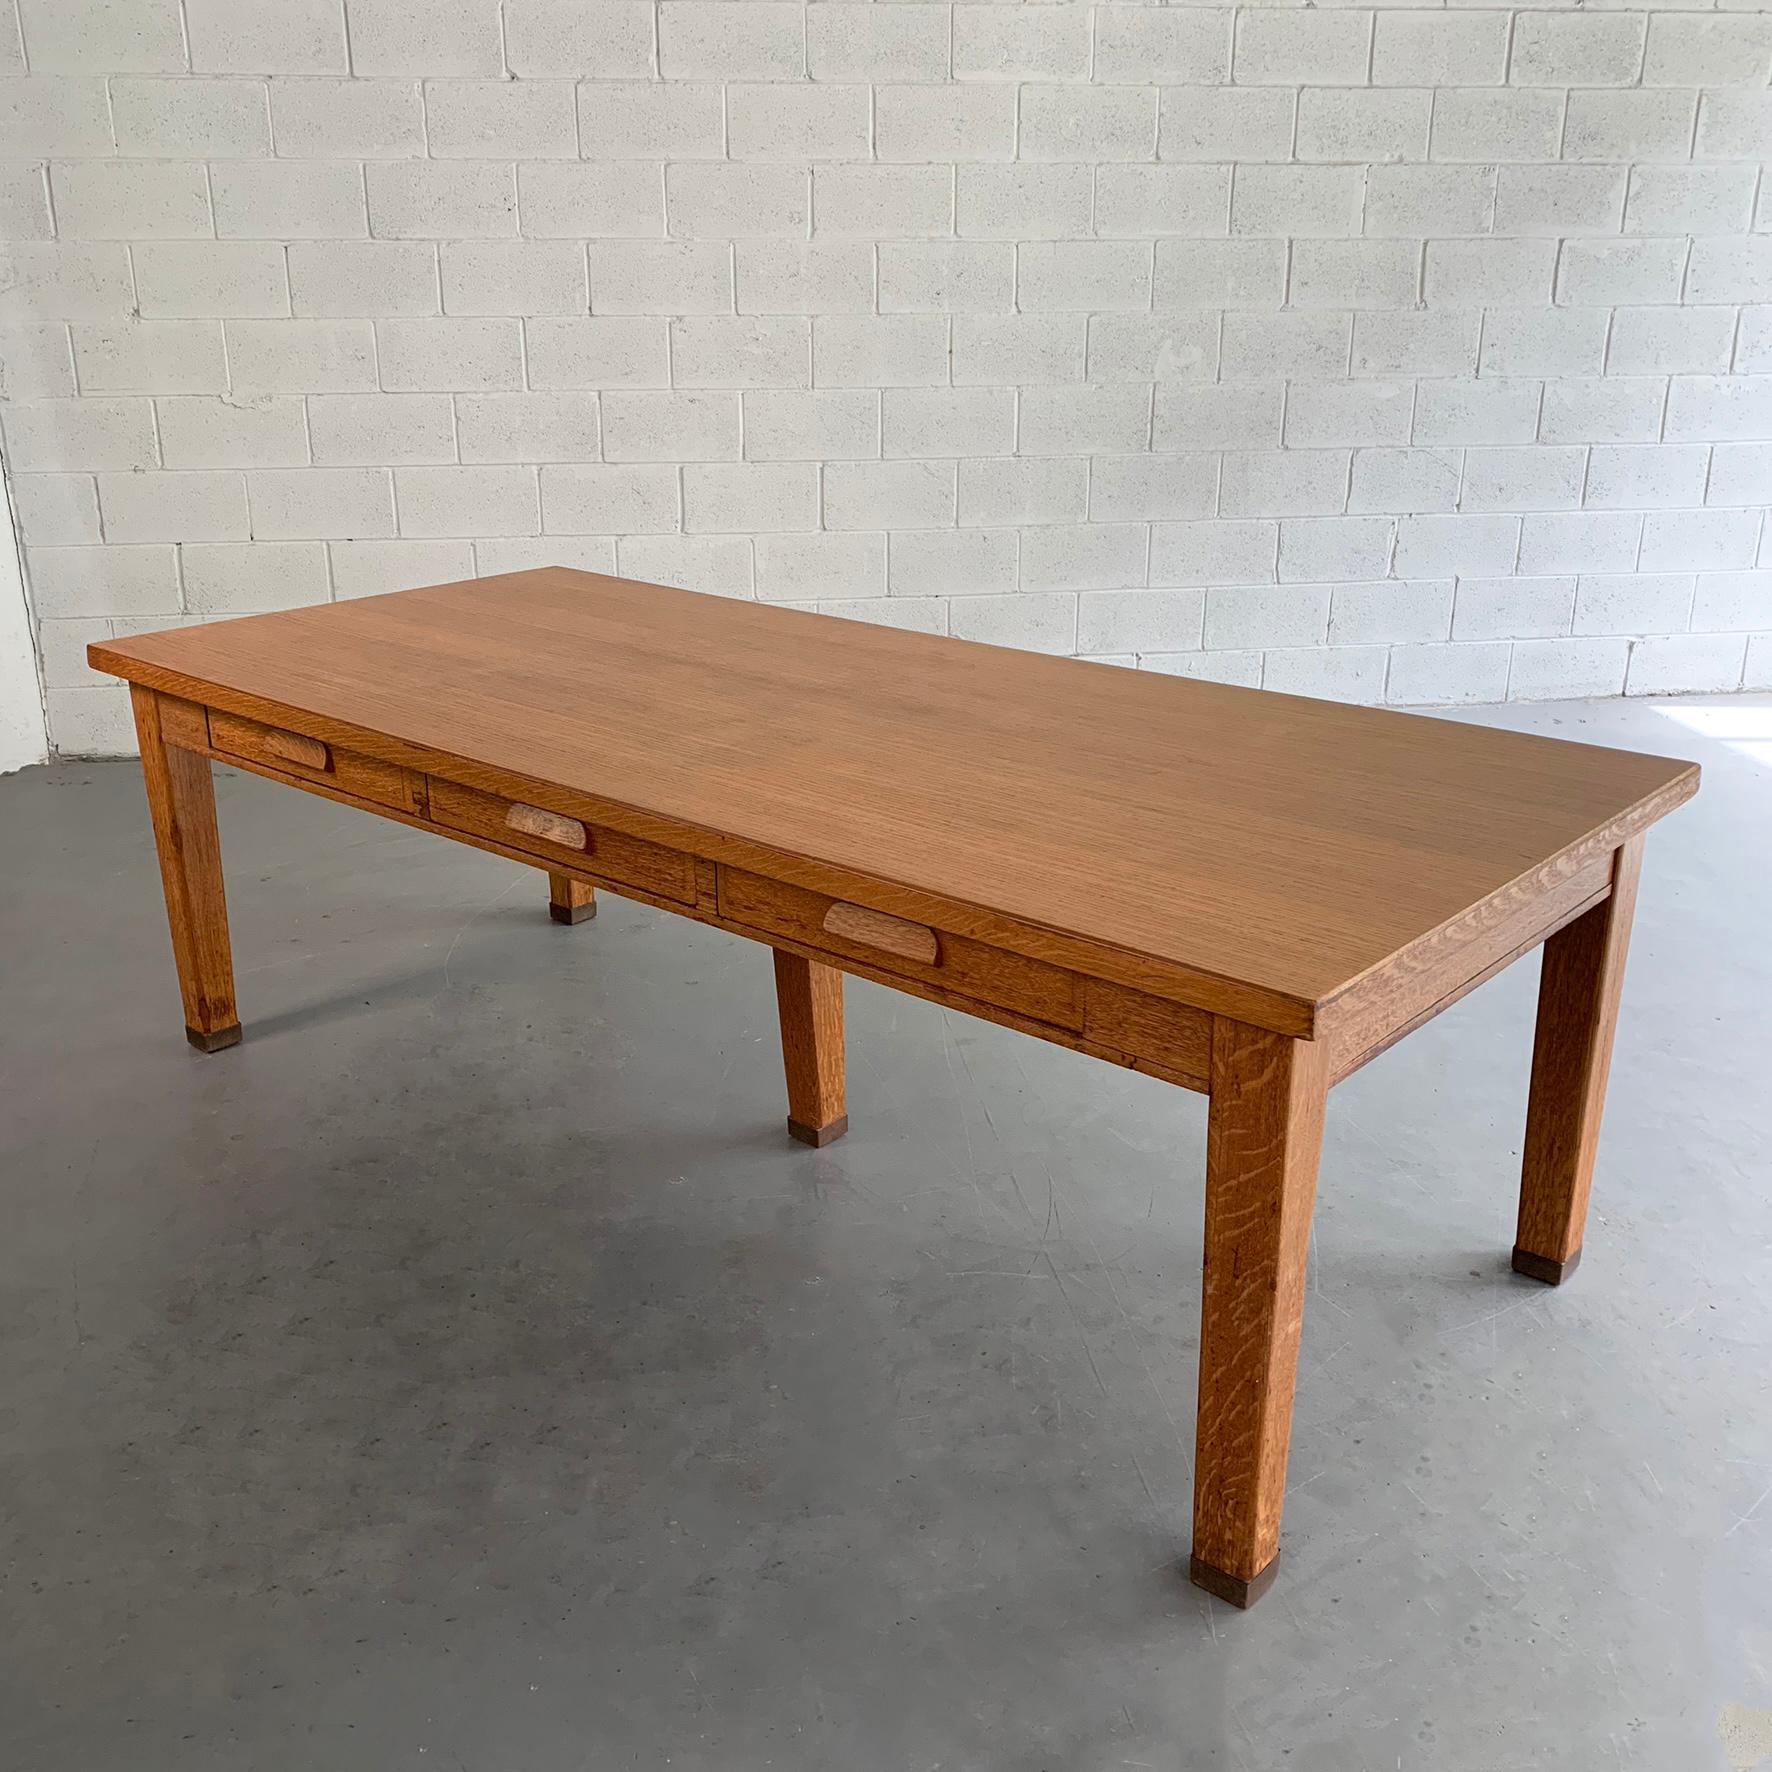 Large, 8 ft, industrial, oak library table features 3 drawers on each side with brass capped legs. The table is versatile and can be used as a dining table, partners desk or large work table. The leg height clearance is 24.5 inches.